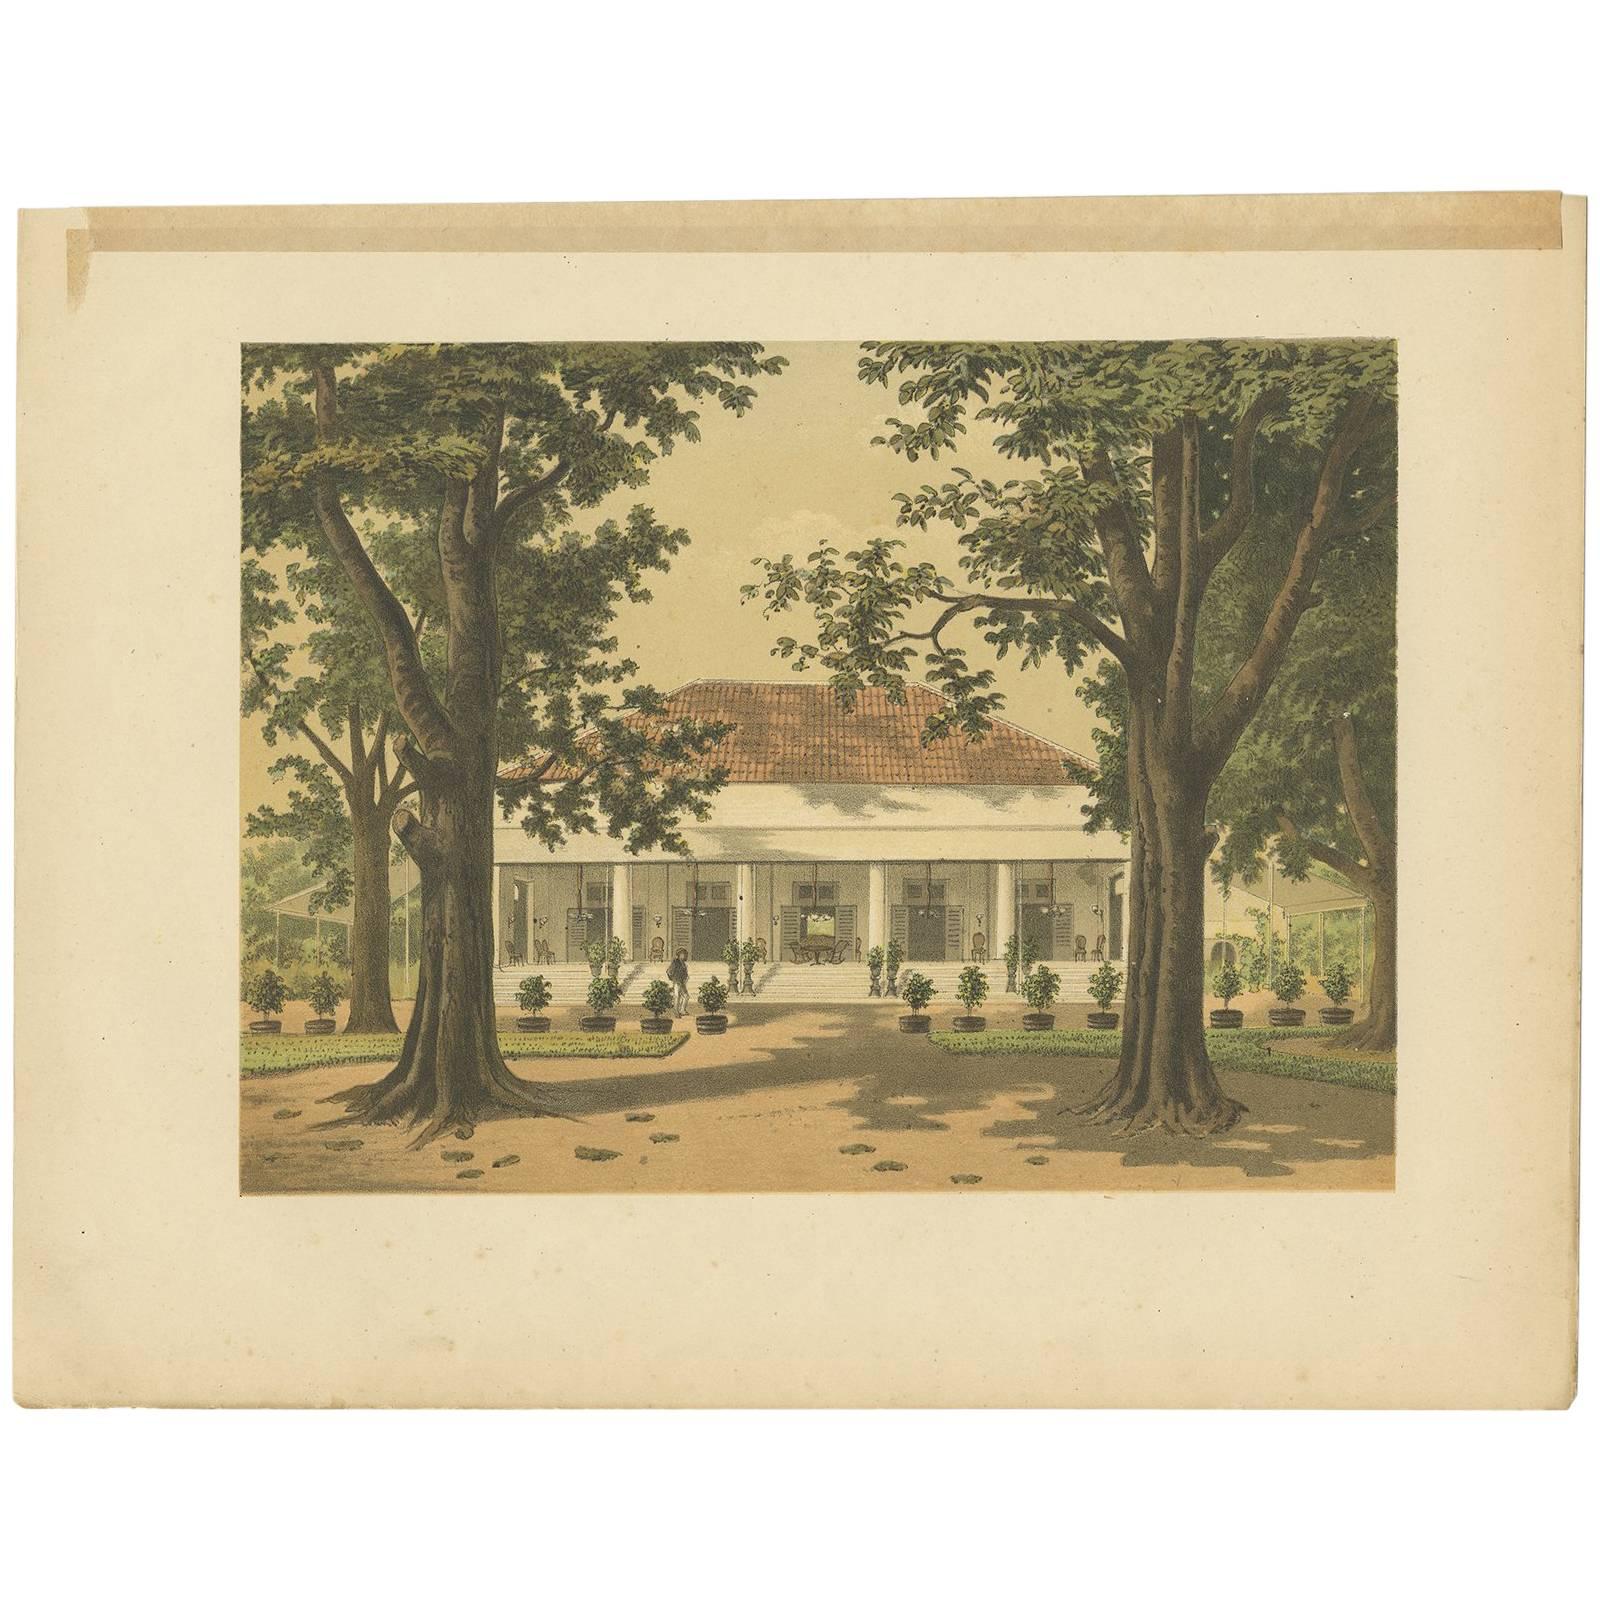 Antique Print of a Residence in Padang 'Java' by M.T.H. Perelaer, 1888